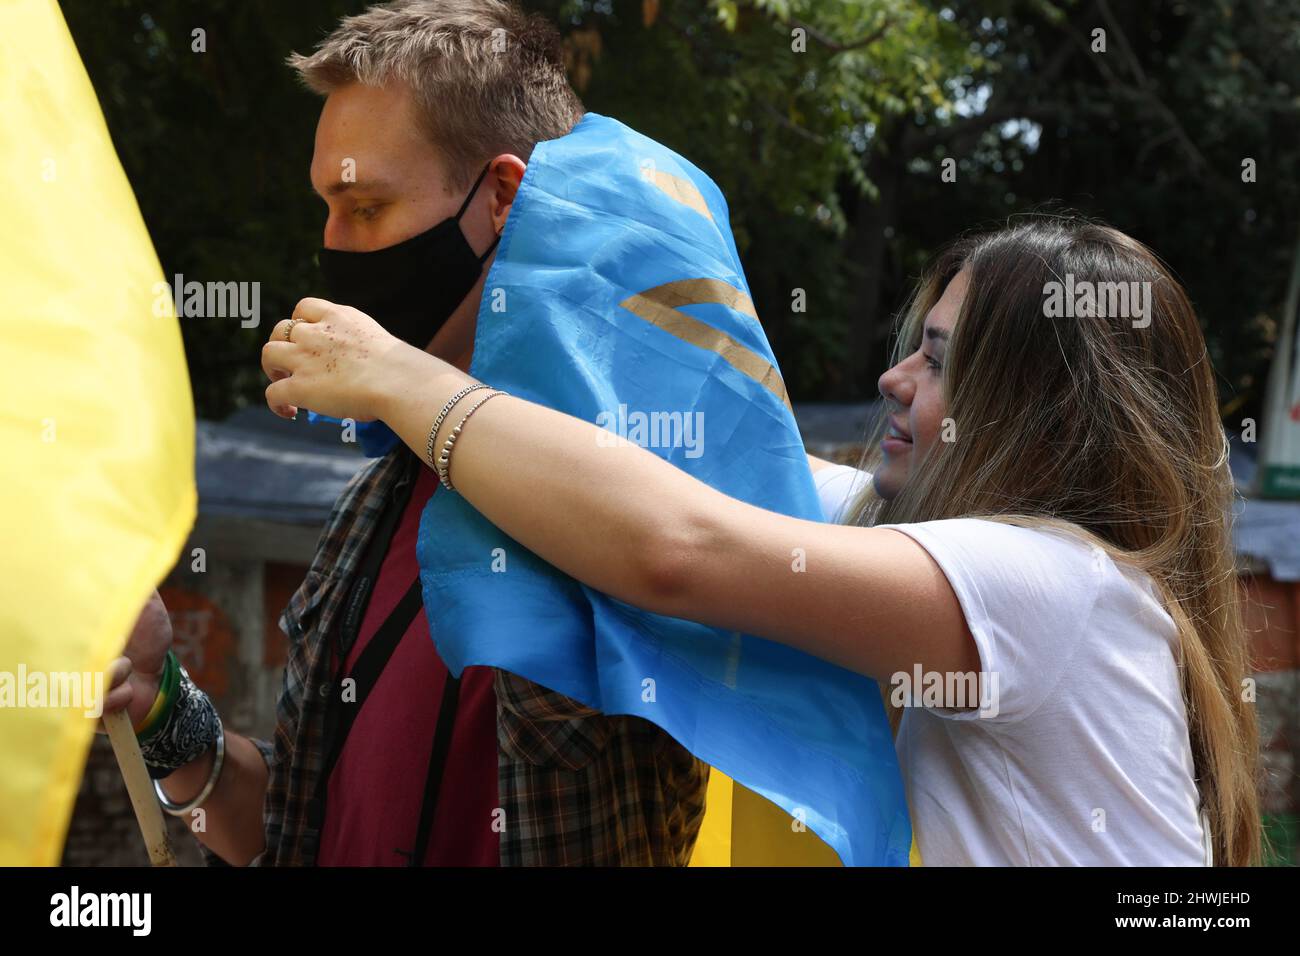 New Delhi, New Delhi, India. 6th Mar, 2022. A Ukrainian woman wraps a man with a national flag in solidarity with the people of Ukraine after Russia's invasion. (Credit Image: © Karma Sonam Bhutia/ZUMA Press Wire) Stock Photo